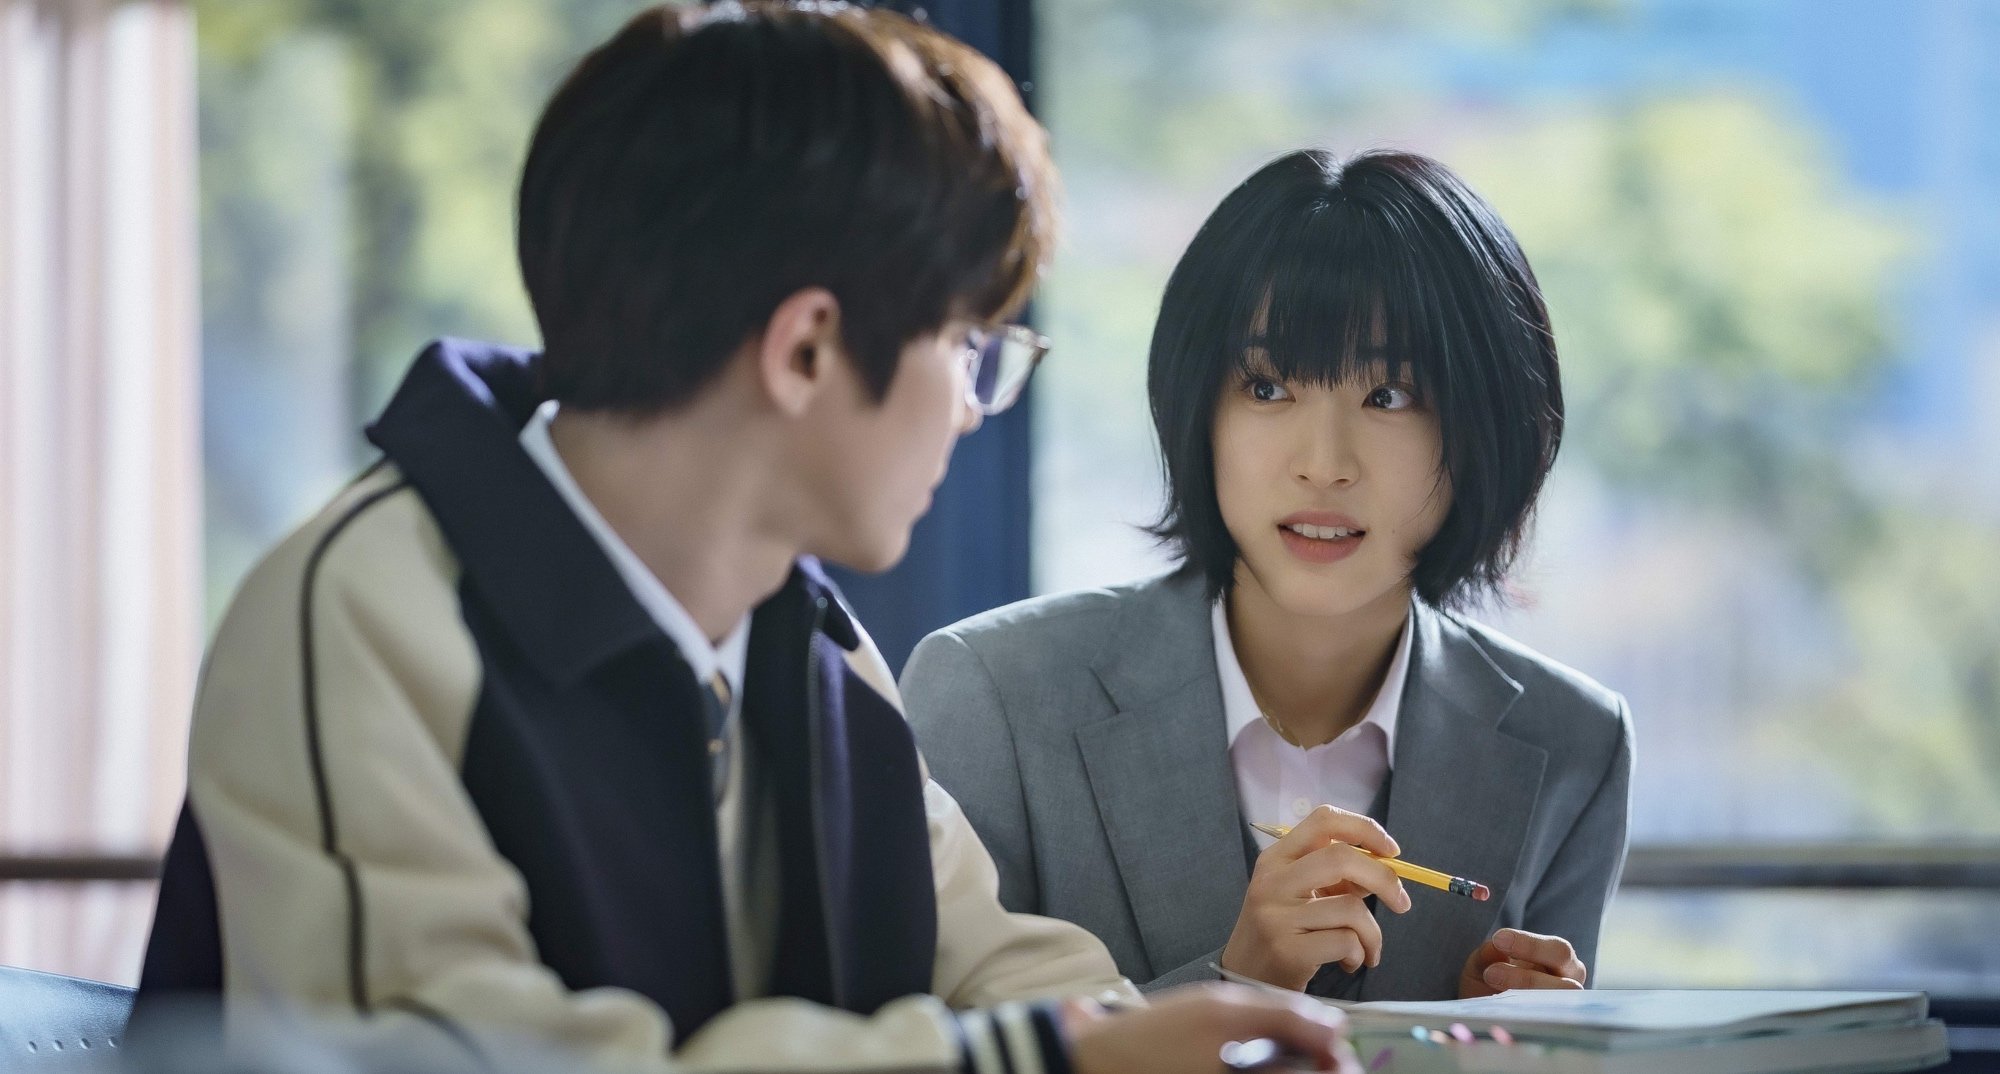 Il-deung and Ah-yi in 'The Sound of Magic' K-drama in school classroom.